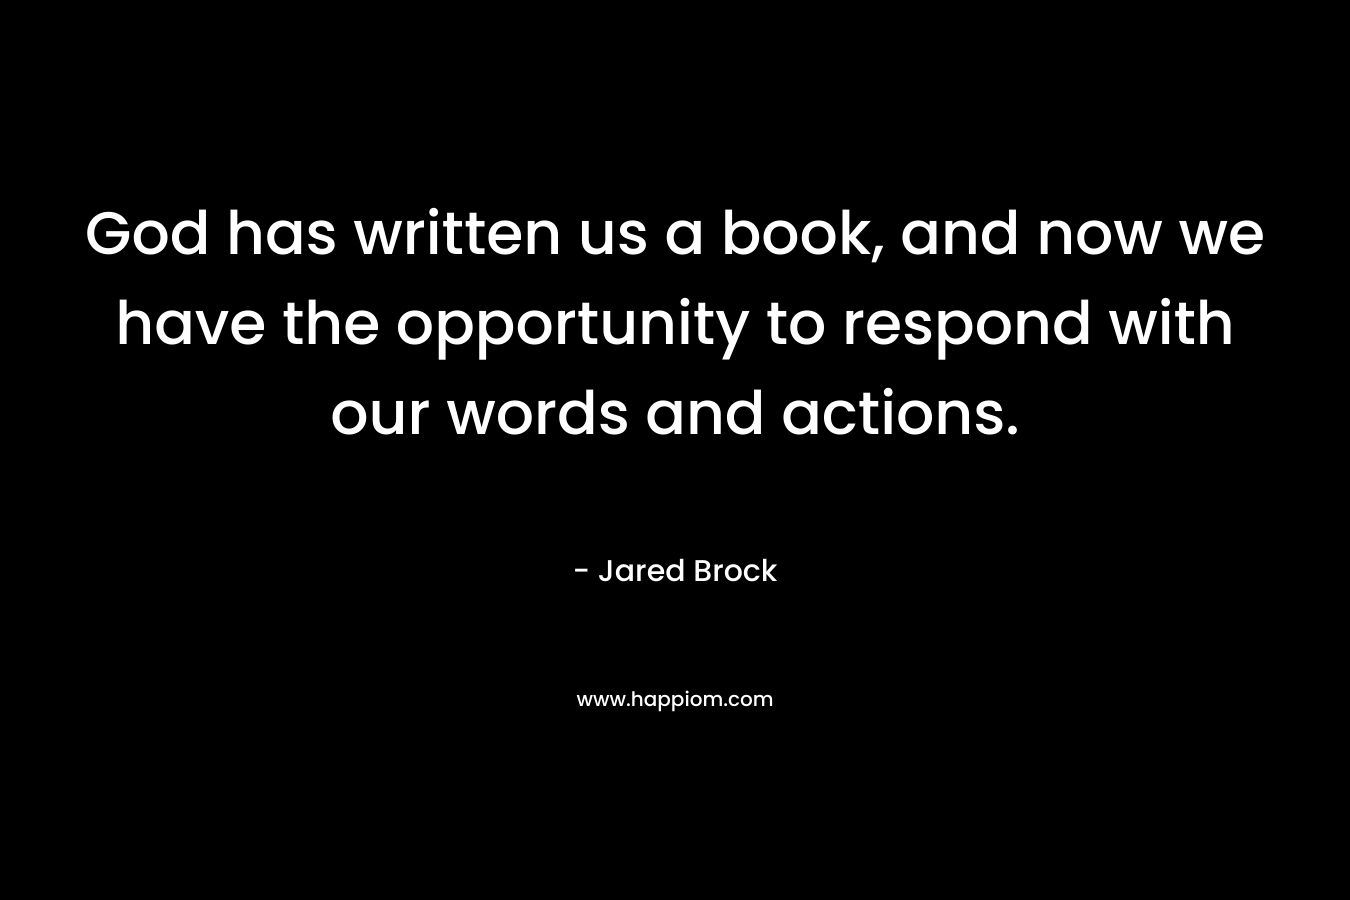 God has written us a book, and now we have the opportunity to respond with our words and actions.